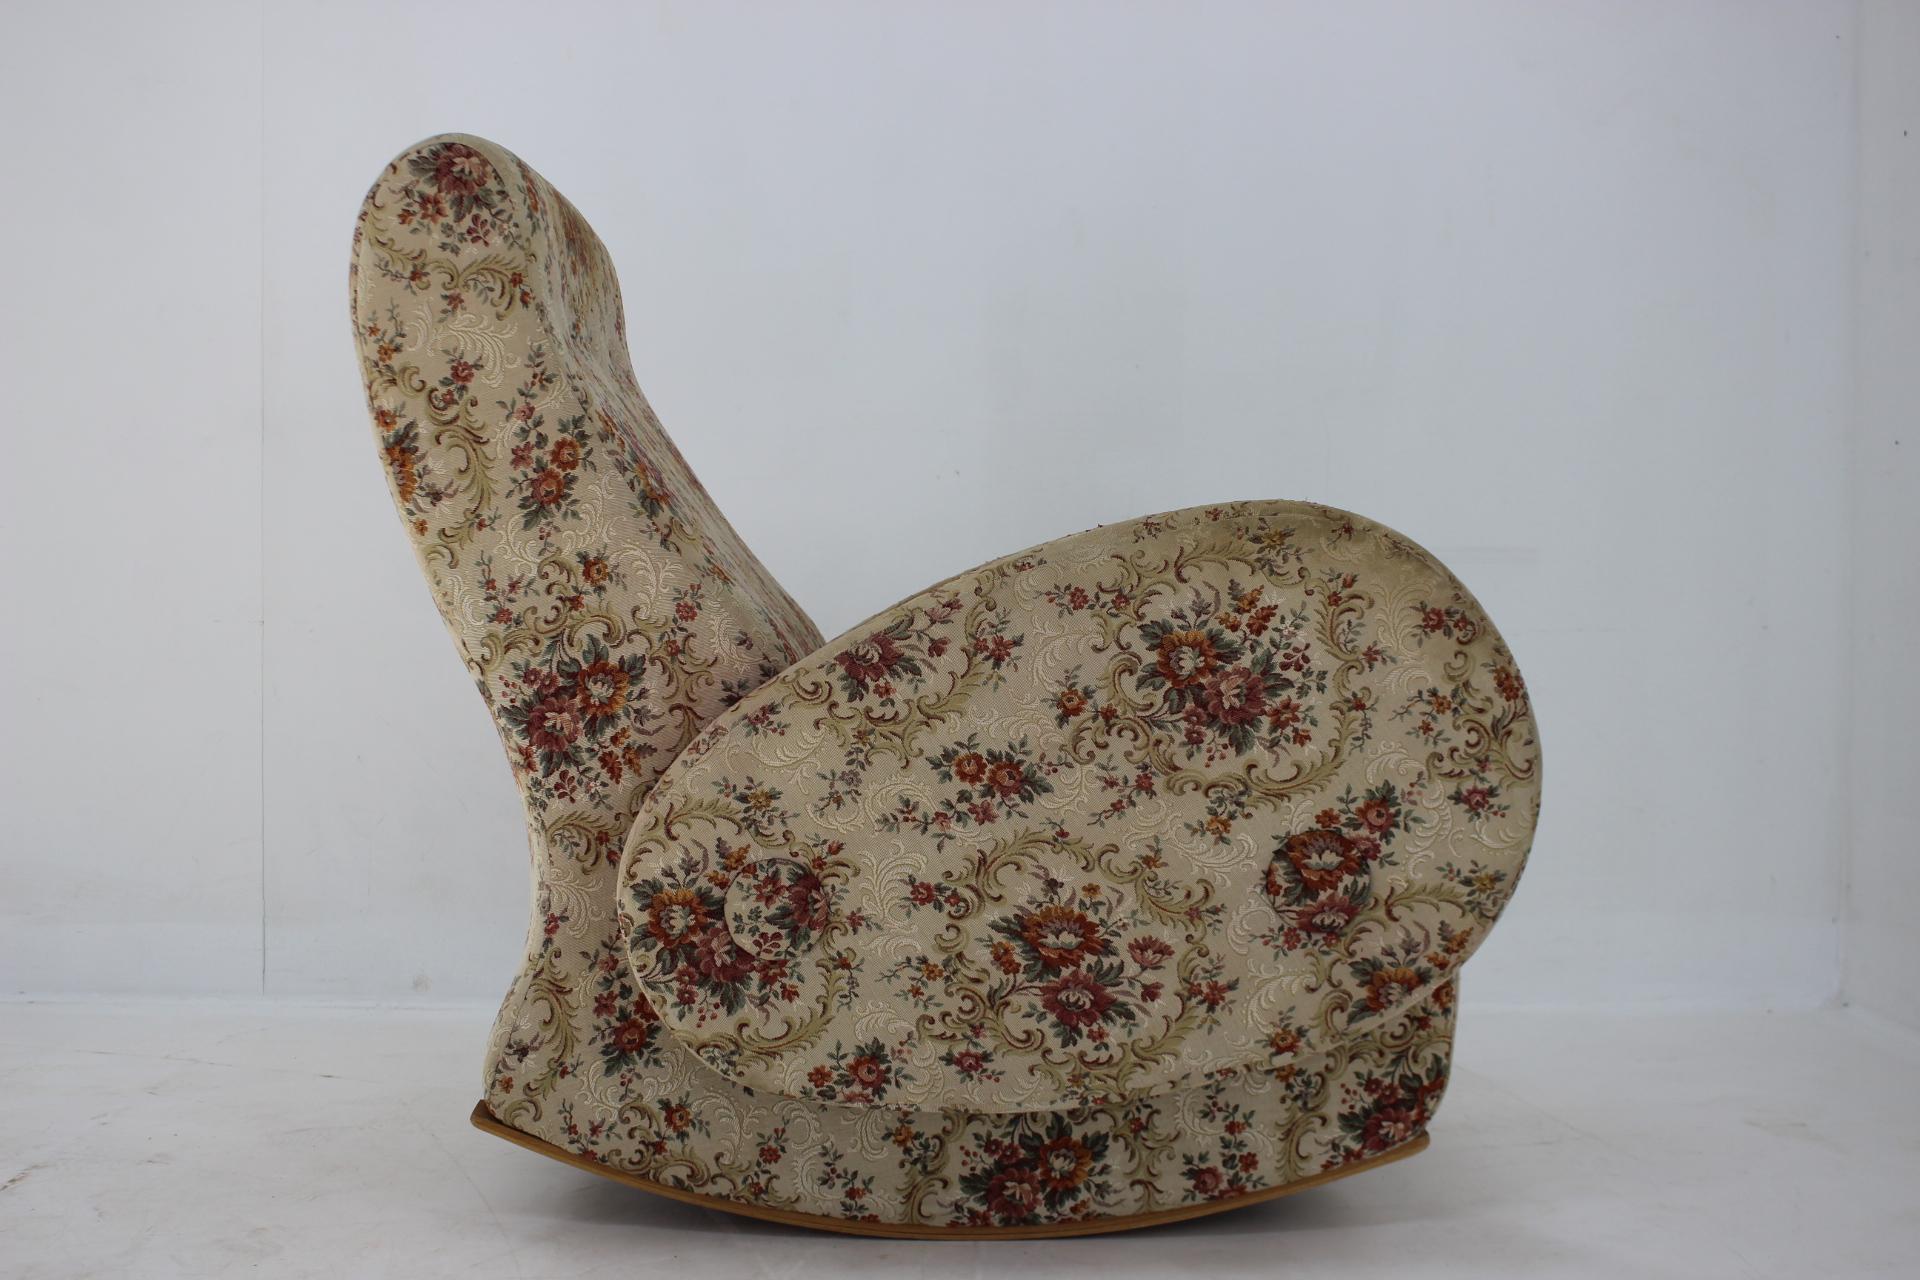 - good original condition 
- suitable for new upholstery 
- height of seat 37 cm.